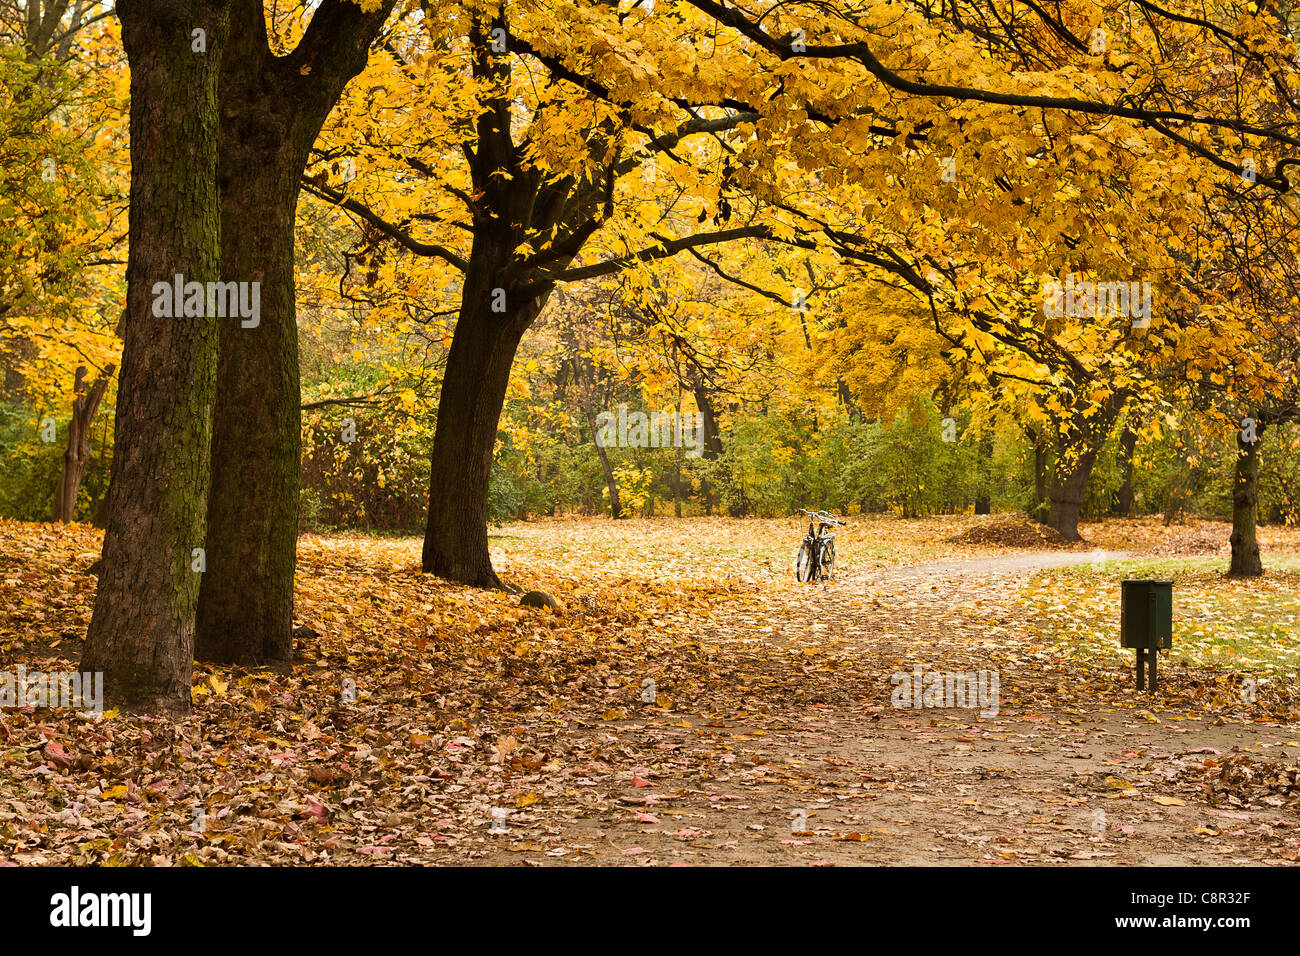 Autumn in the park. A bike parked on the path. Stock Photo